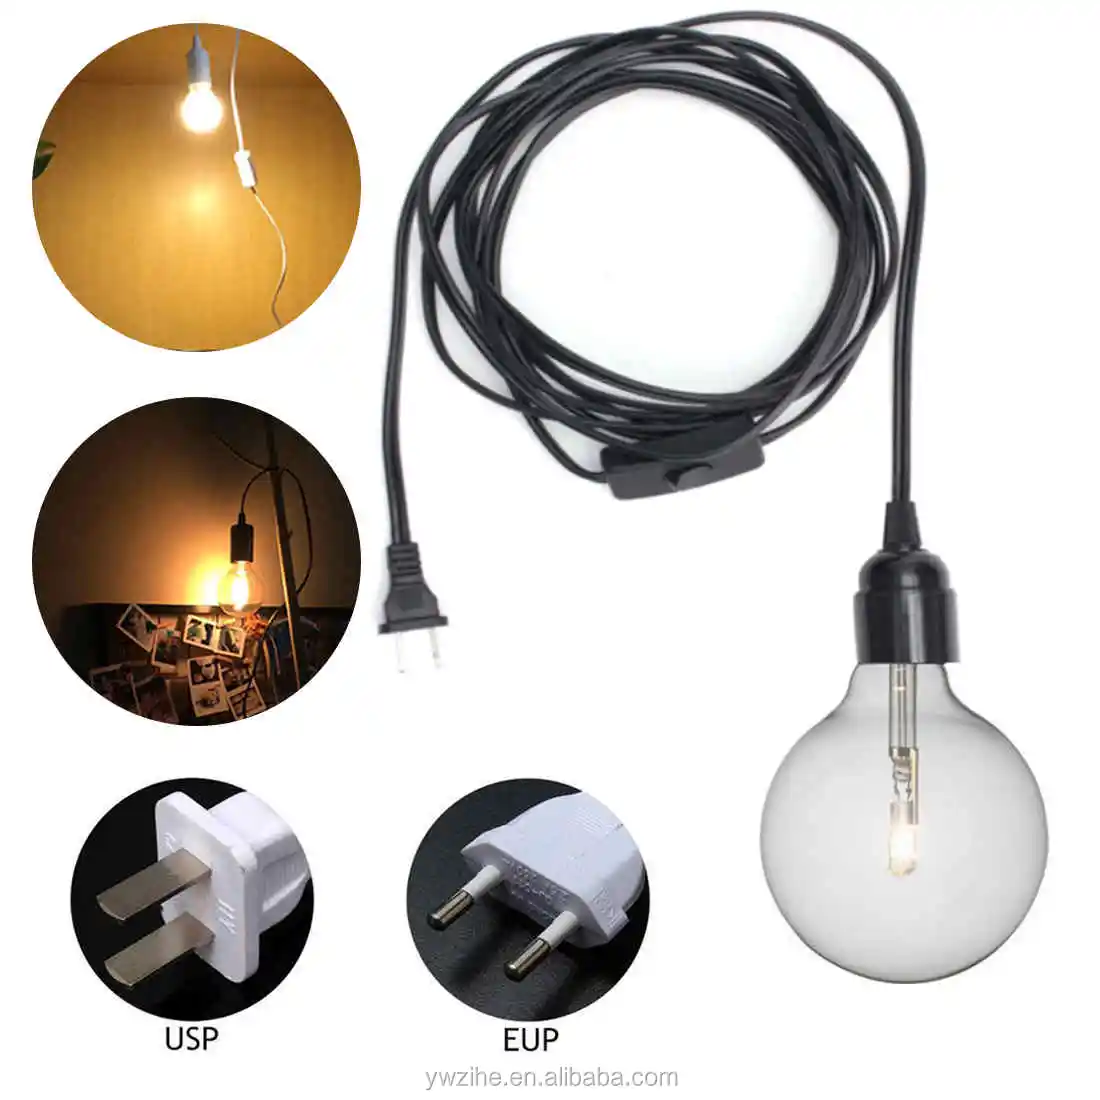 vægt æg Portal Wholesale 1.5m Power Cord Cable E27 Lamp Bases EU/US Plug with Switch Wire  for Pendant LED Bulb E27 Hang Lamp Suspension Socket Holder From  m.alibaba.com